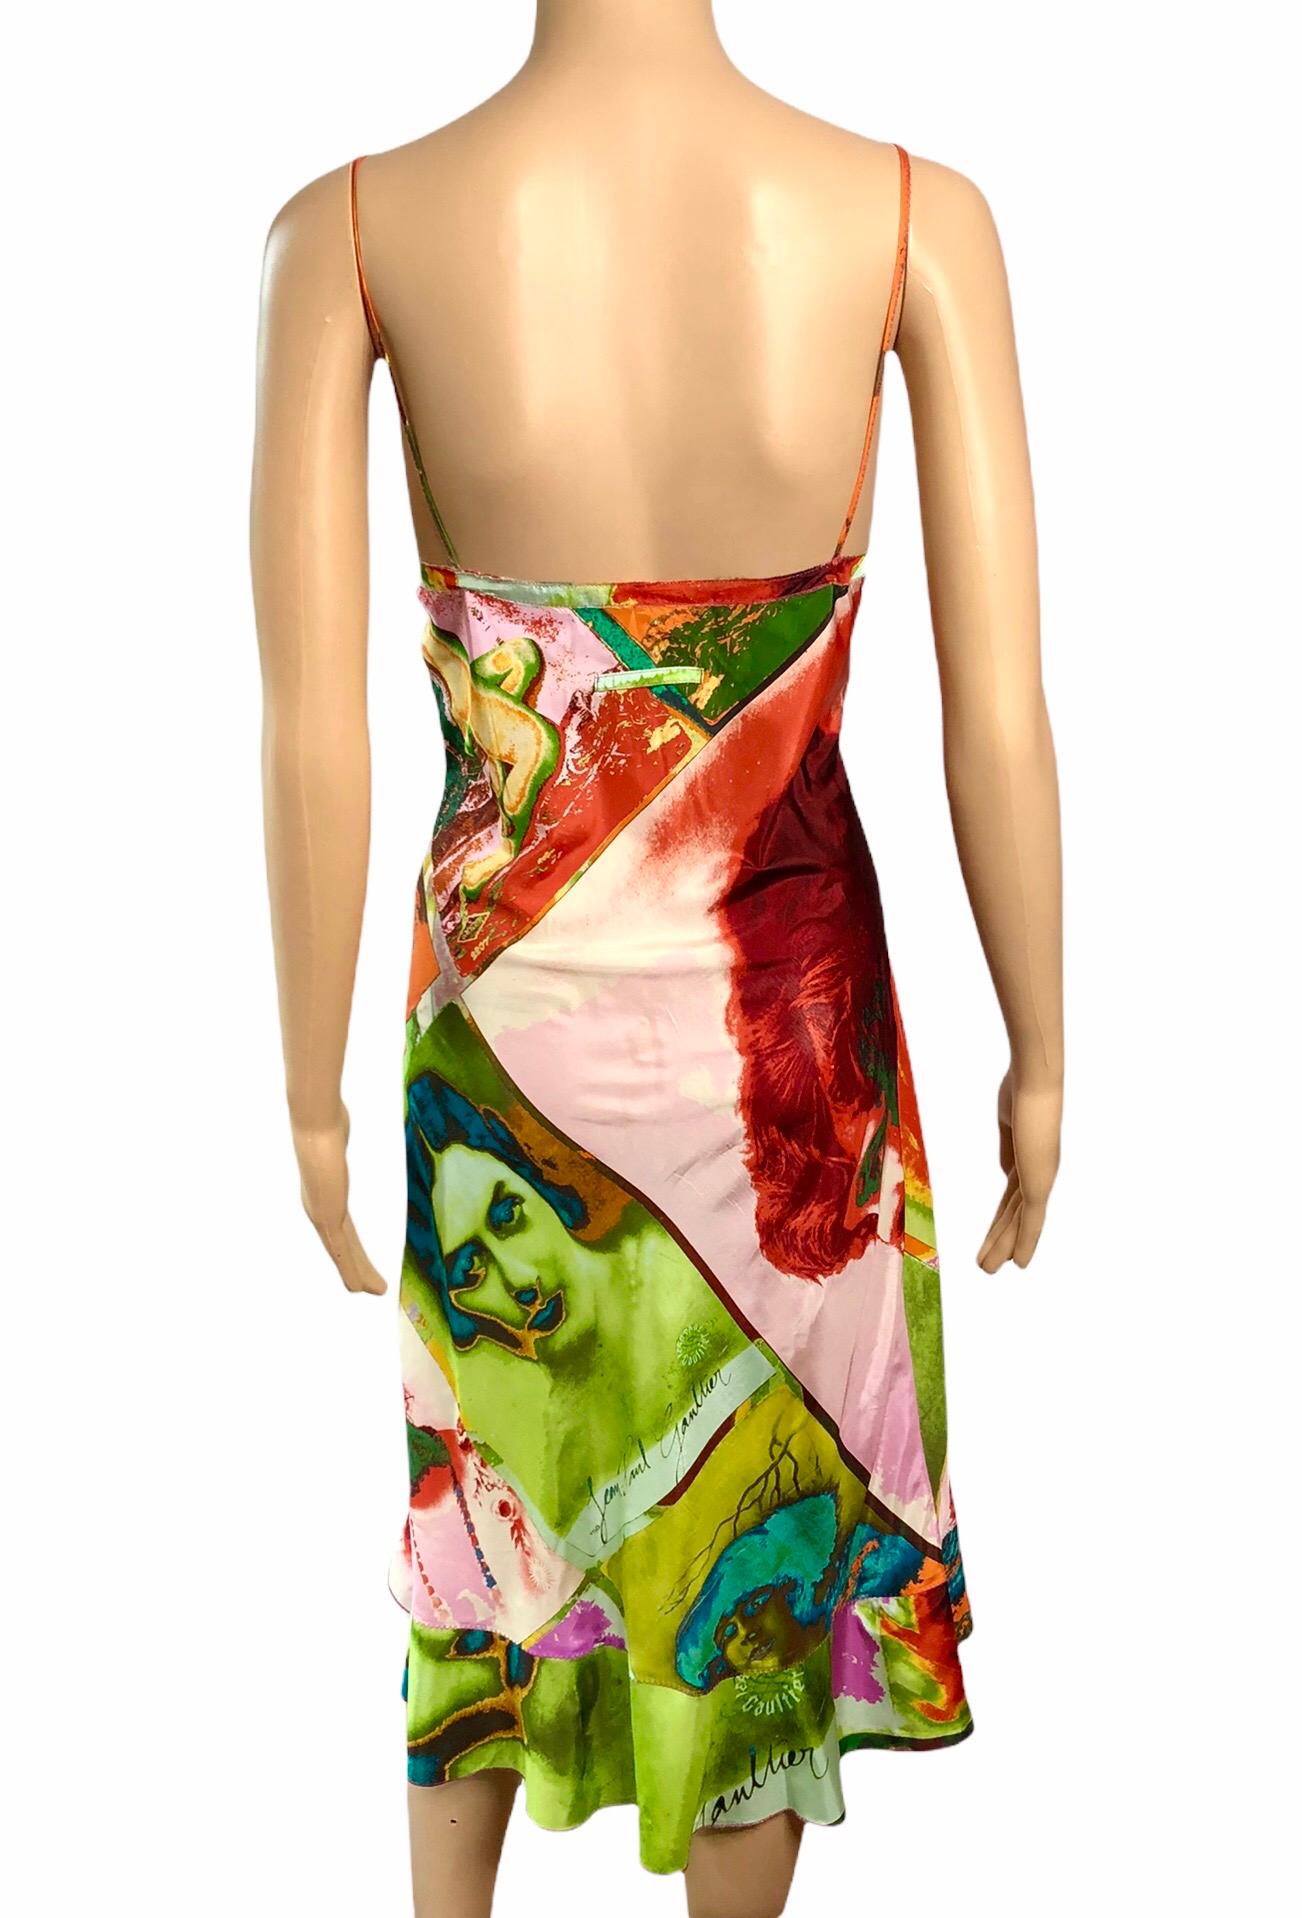 Jean Paul Gaultier S/S 2002 Vintage “Portraits” Faces People Print Slip Dress In Good Condition In Naples, FL